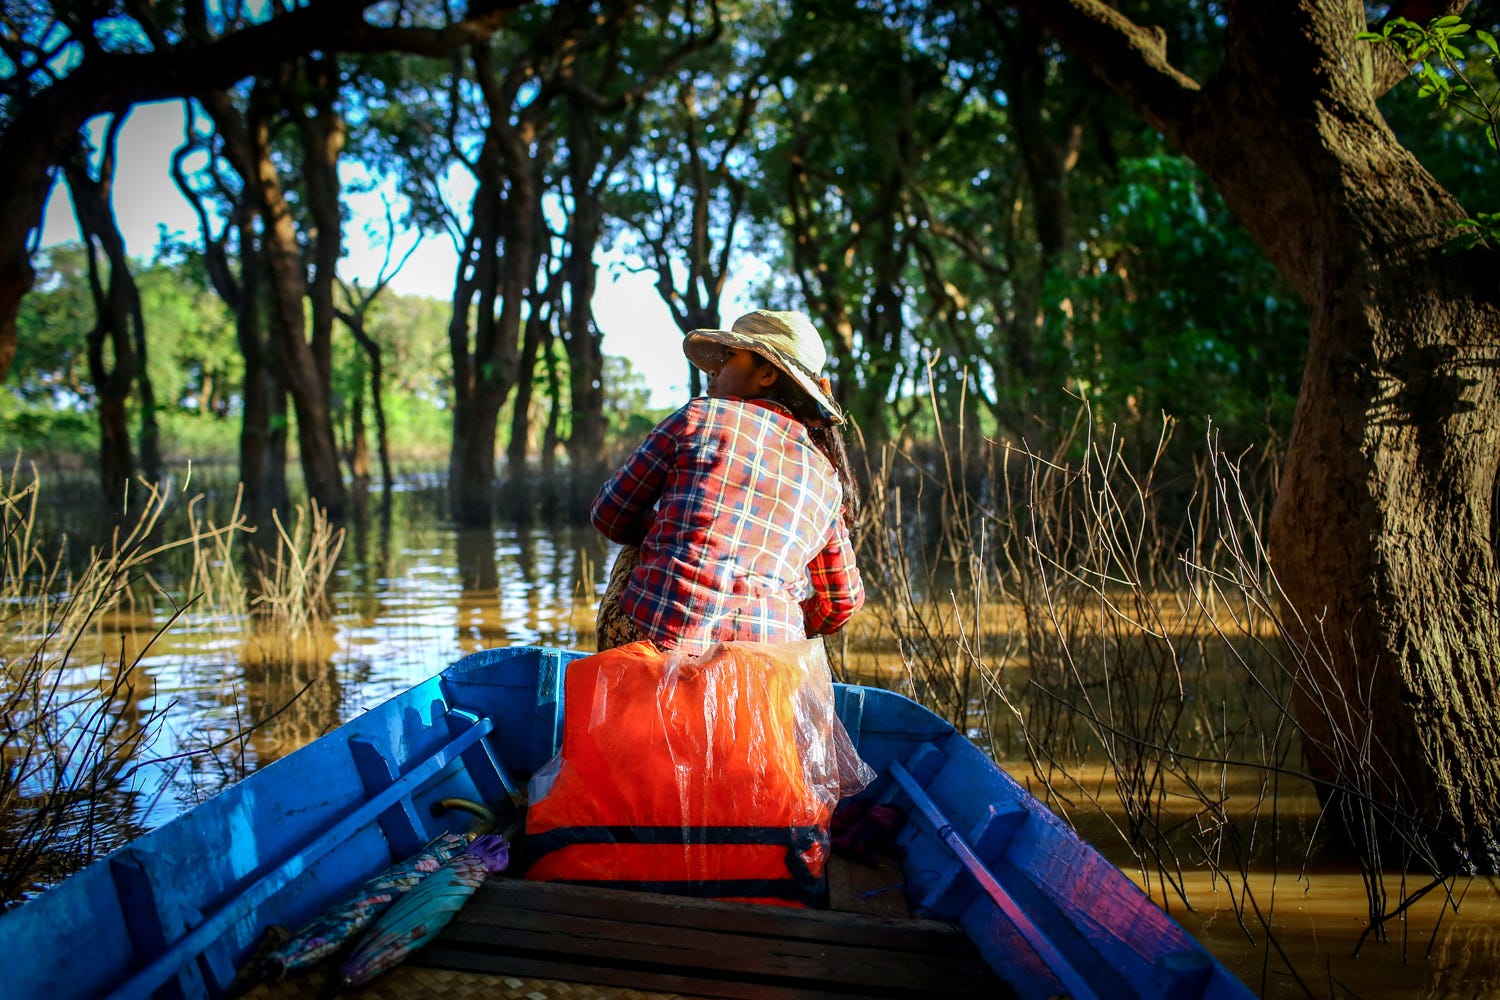 A woman in a plaid shirt is sitting at the front of a small, blue boat, wearing a straw hat and turning to look over her shoulder to speak to the photographer. All around the boat are large trees growing out of a lake. This is a "floating forest" though only the boat floats.